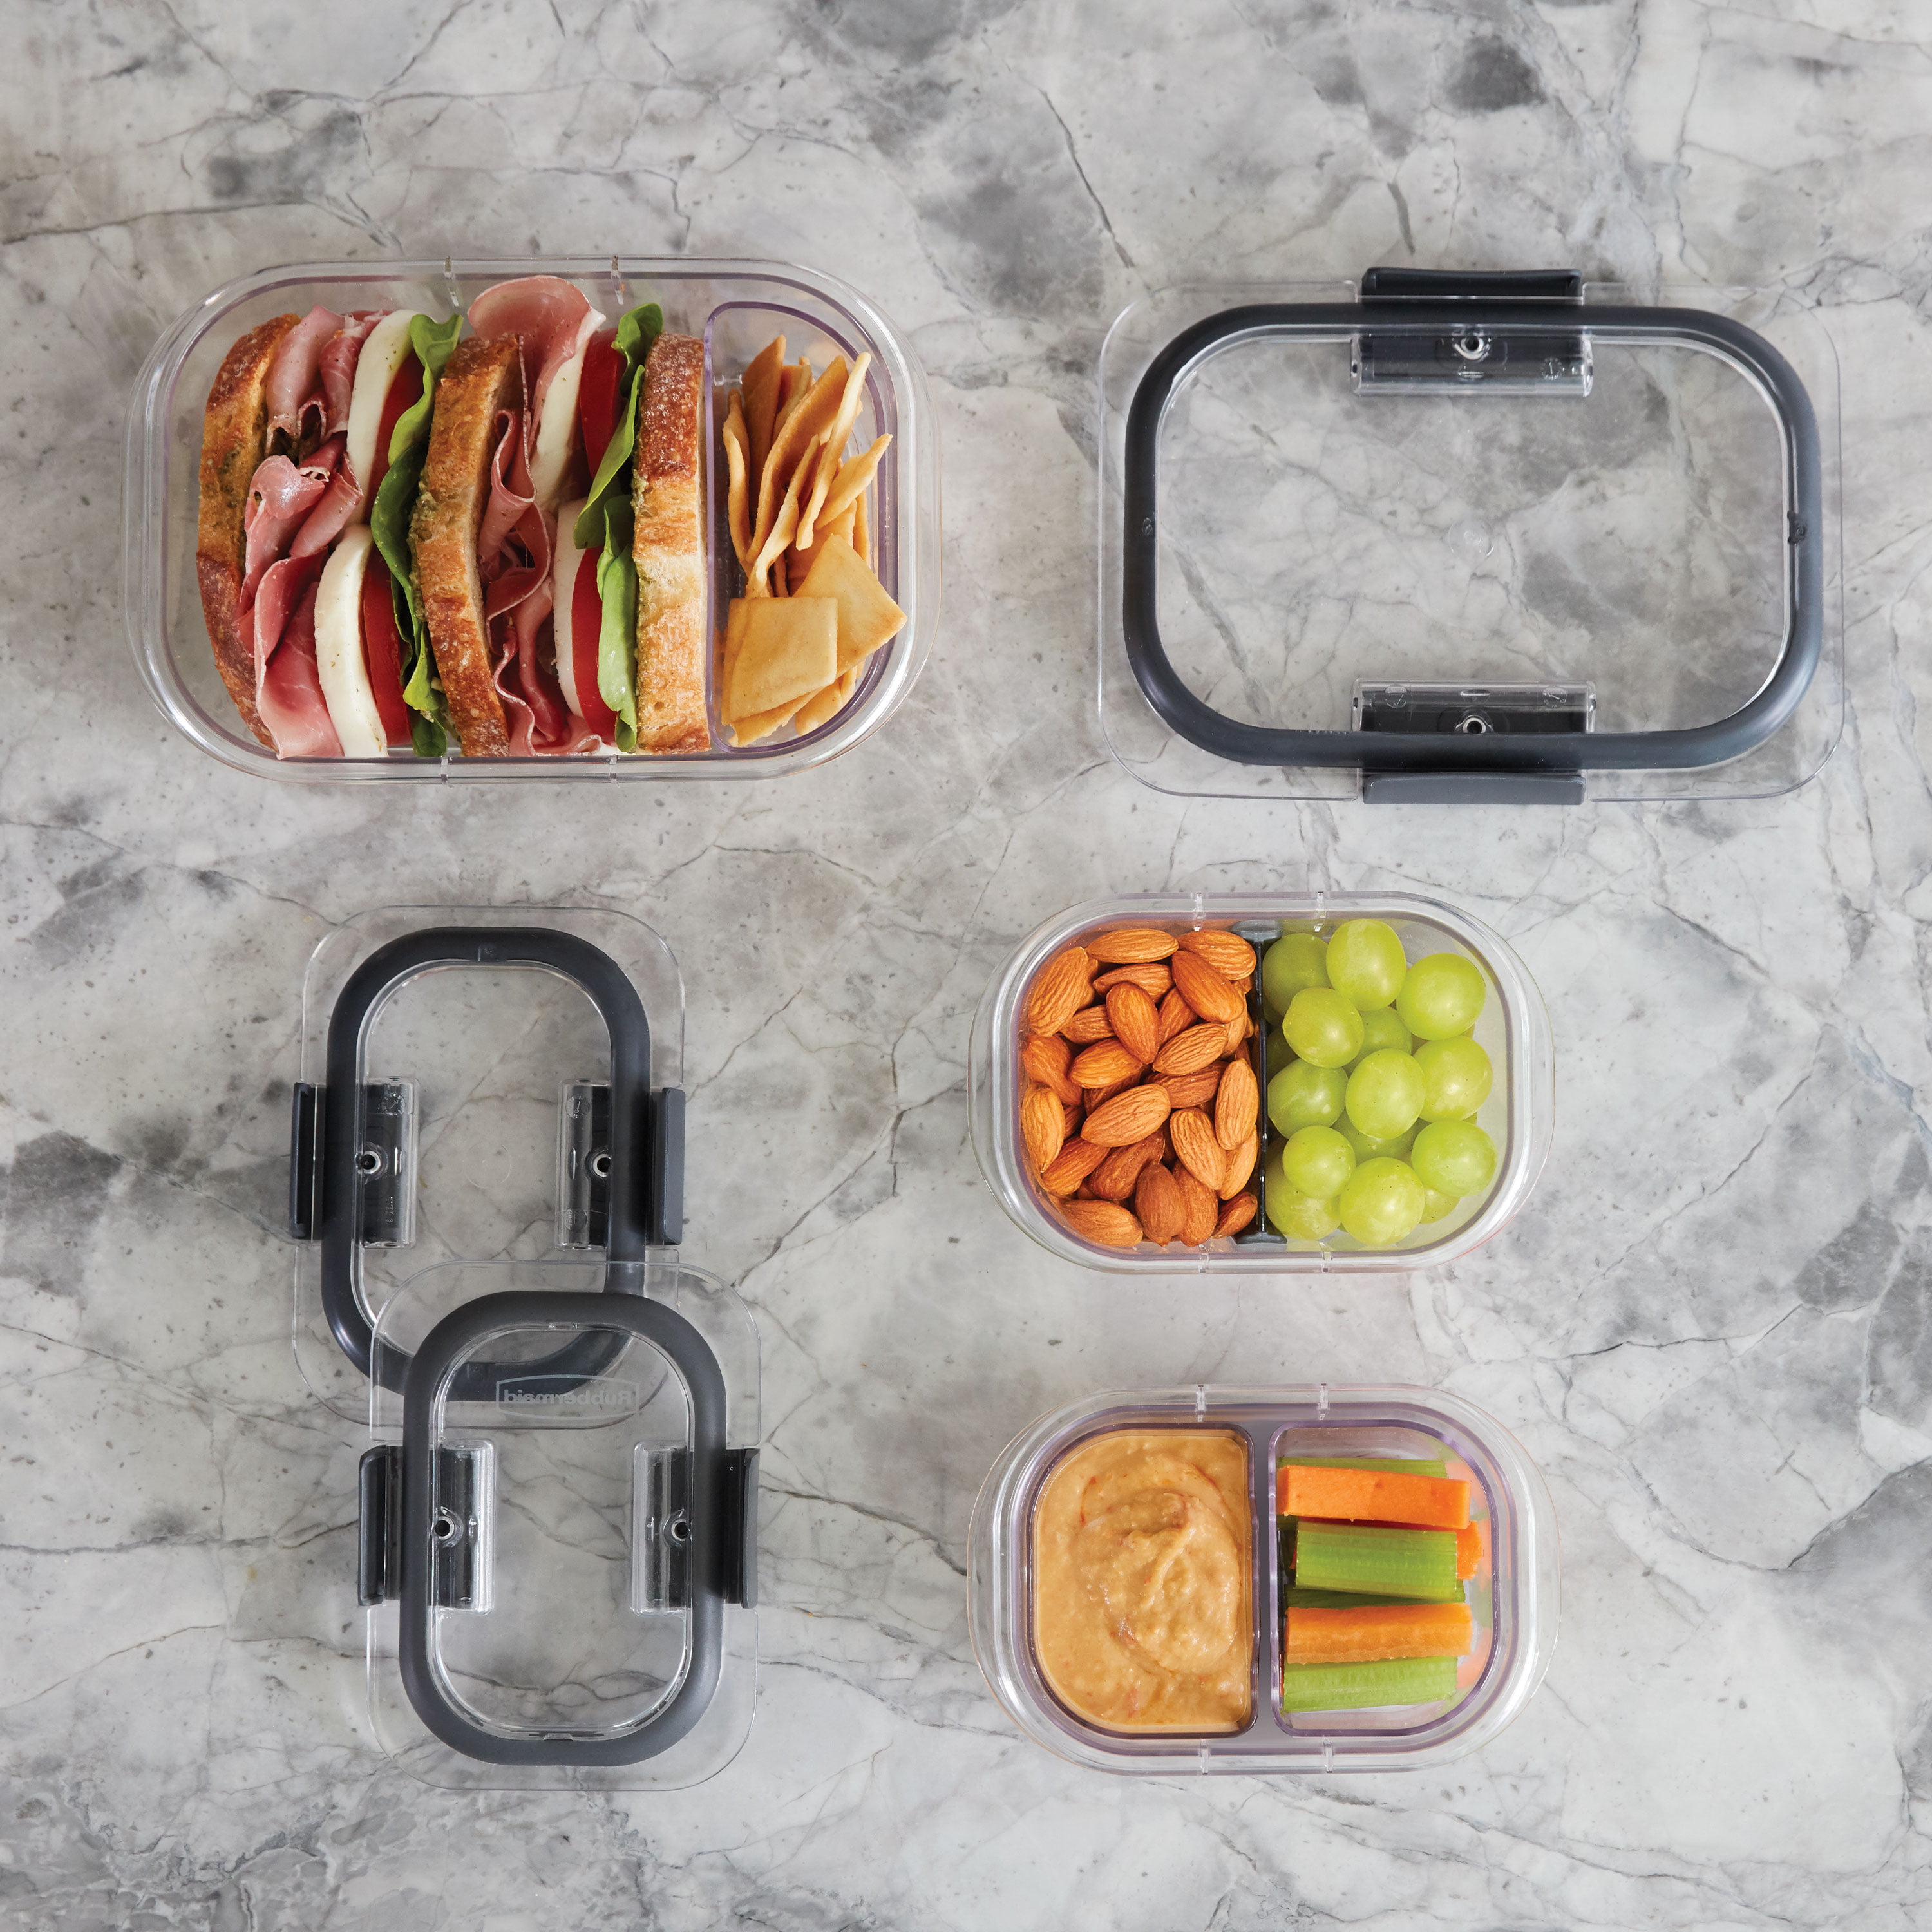 Rubbermaid Brilliance 10 Piece 2 Compartment Meal Prep Food